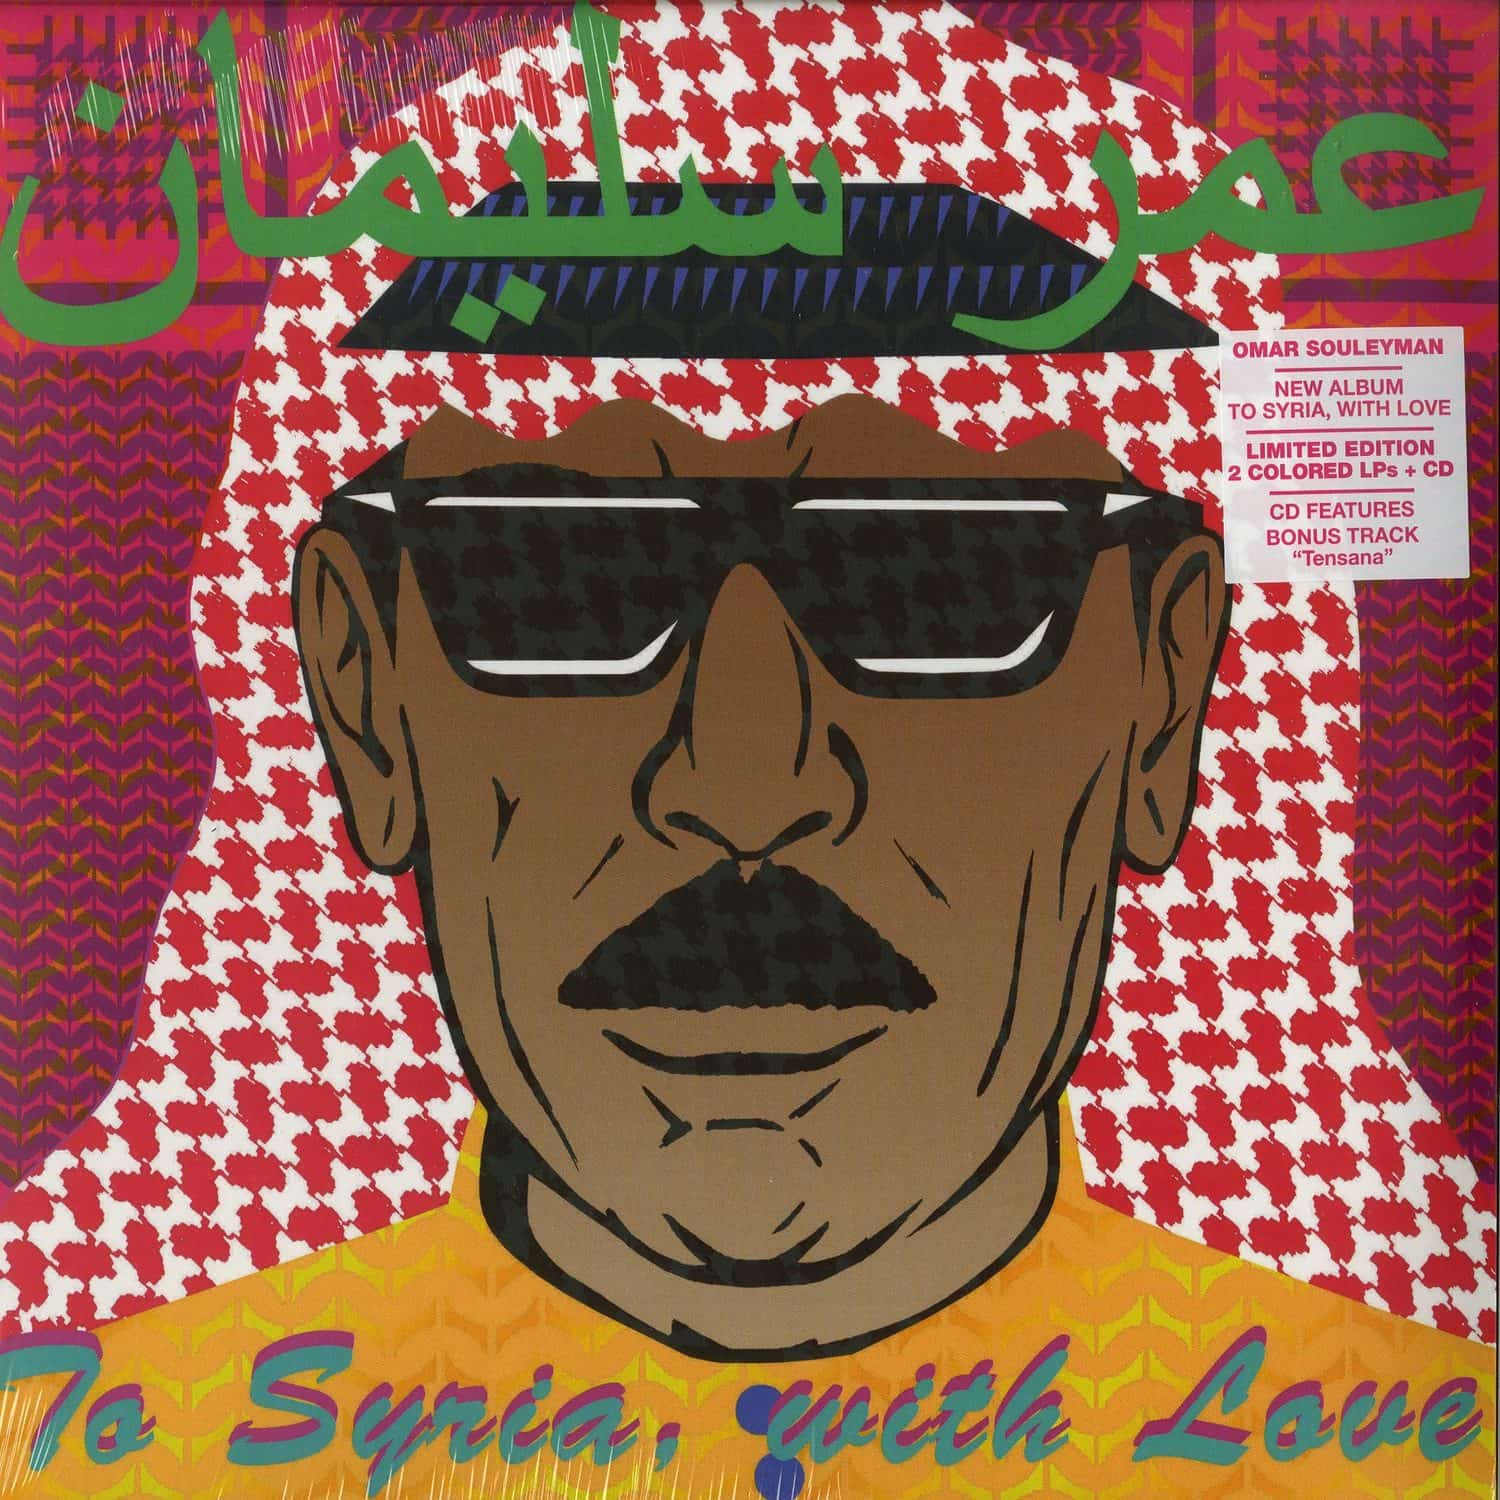 Omar Souleyman - TO SYRIA, WITH LOVE 